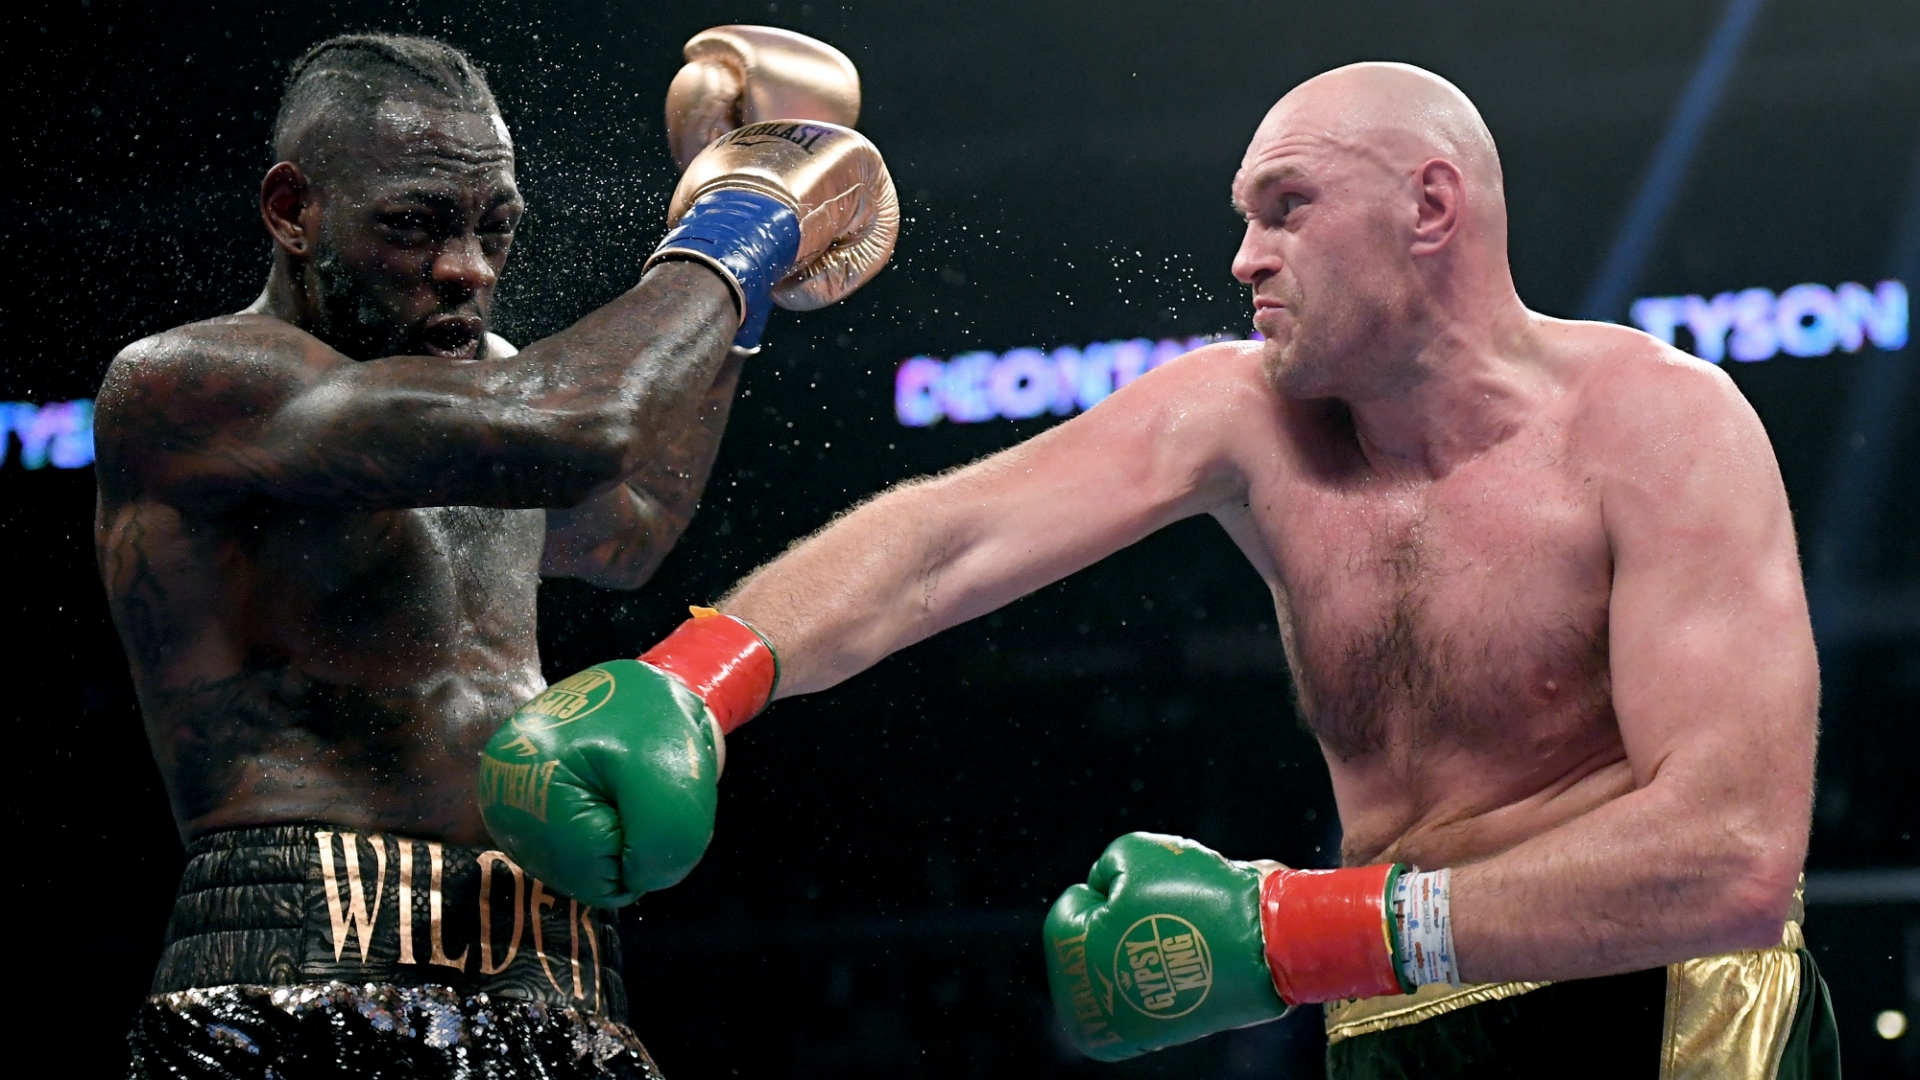 Tyson Fury expects Deontay Wilder rematch in March or April 2020 - The Ring1920 x 1080